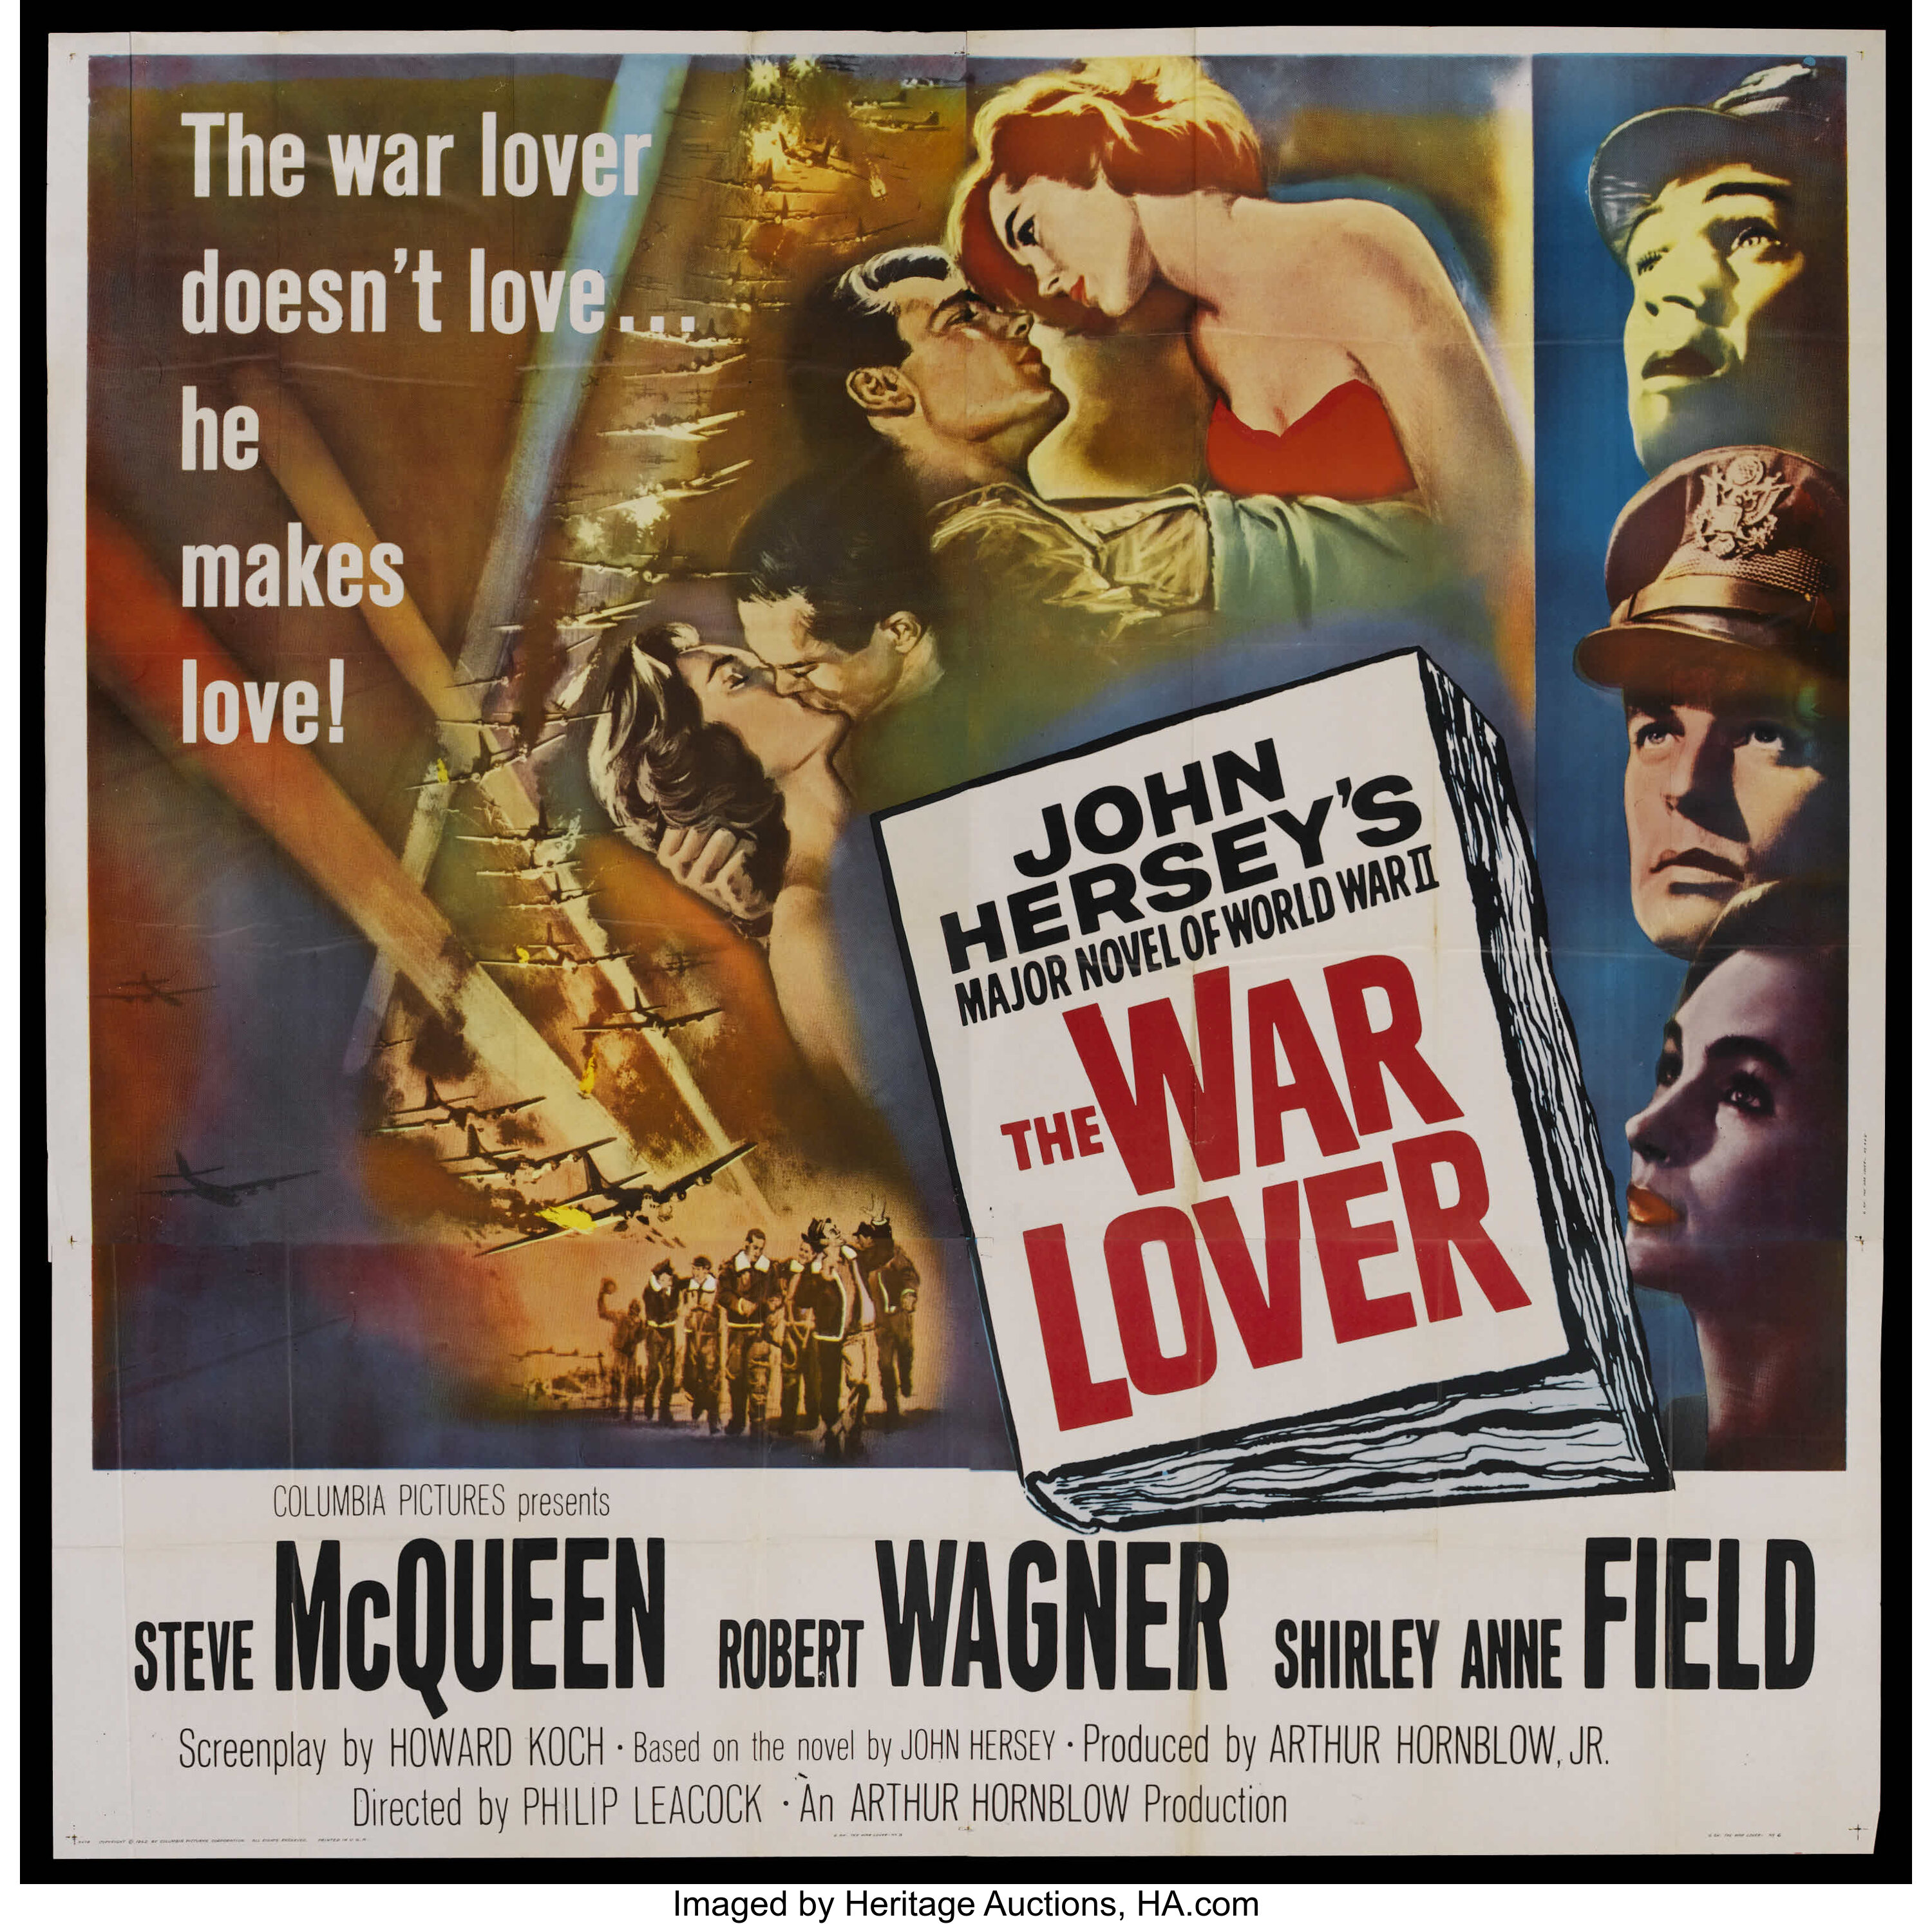 Original Lovers, The (1958) movie poster in VG condition for $40.00